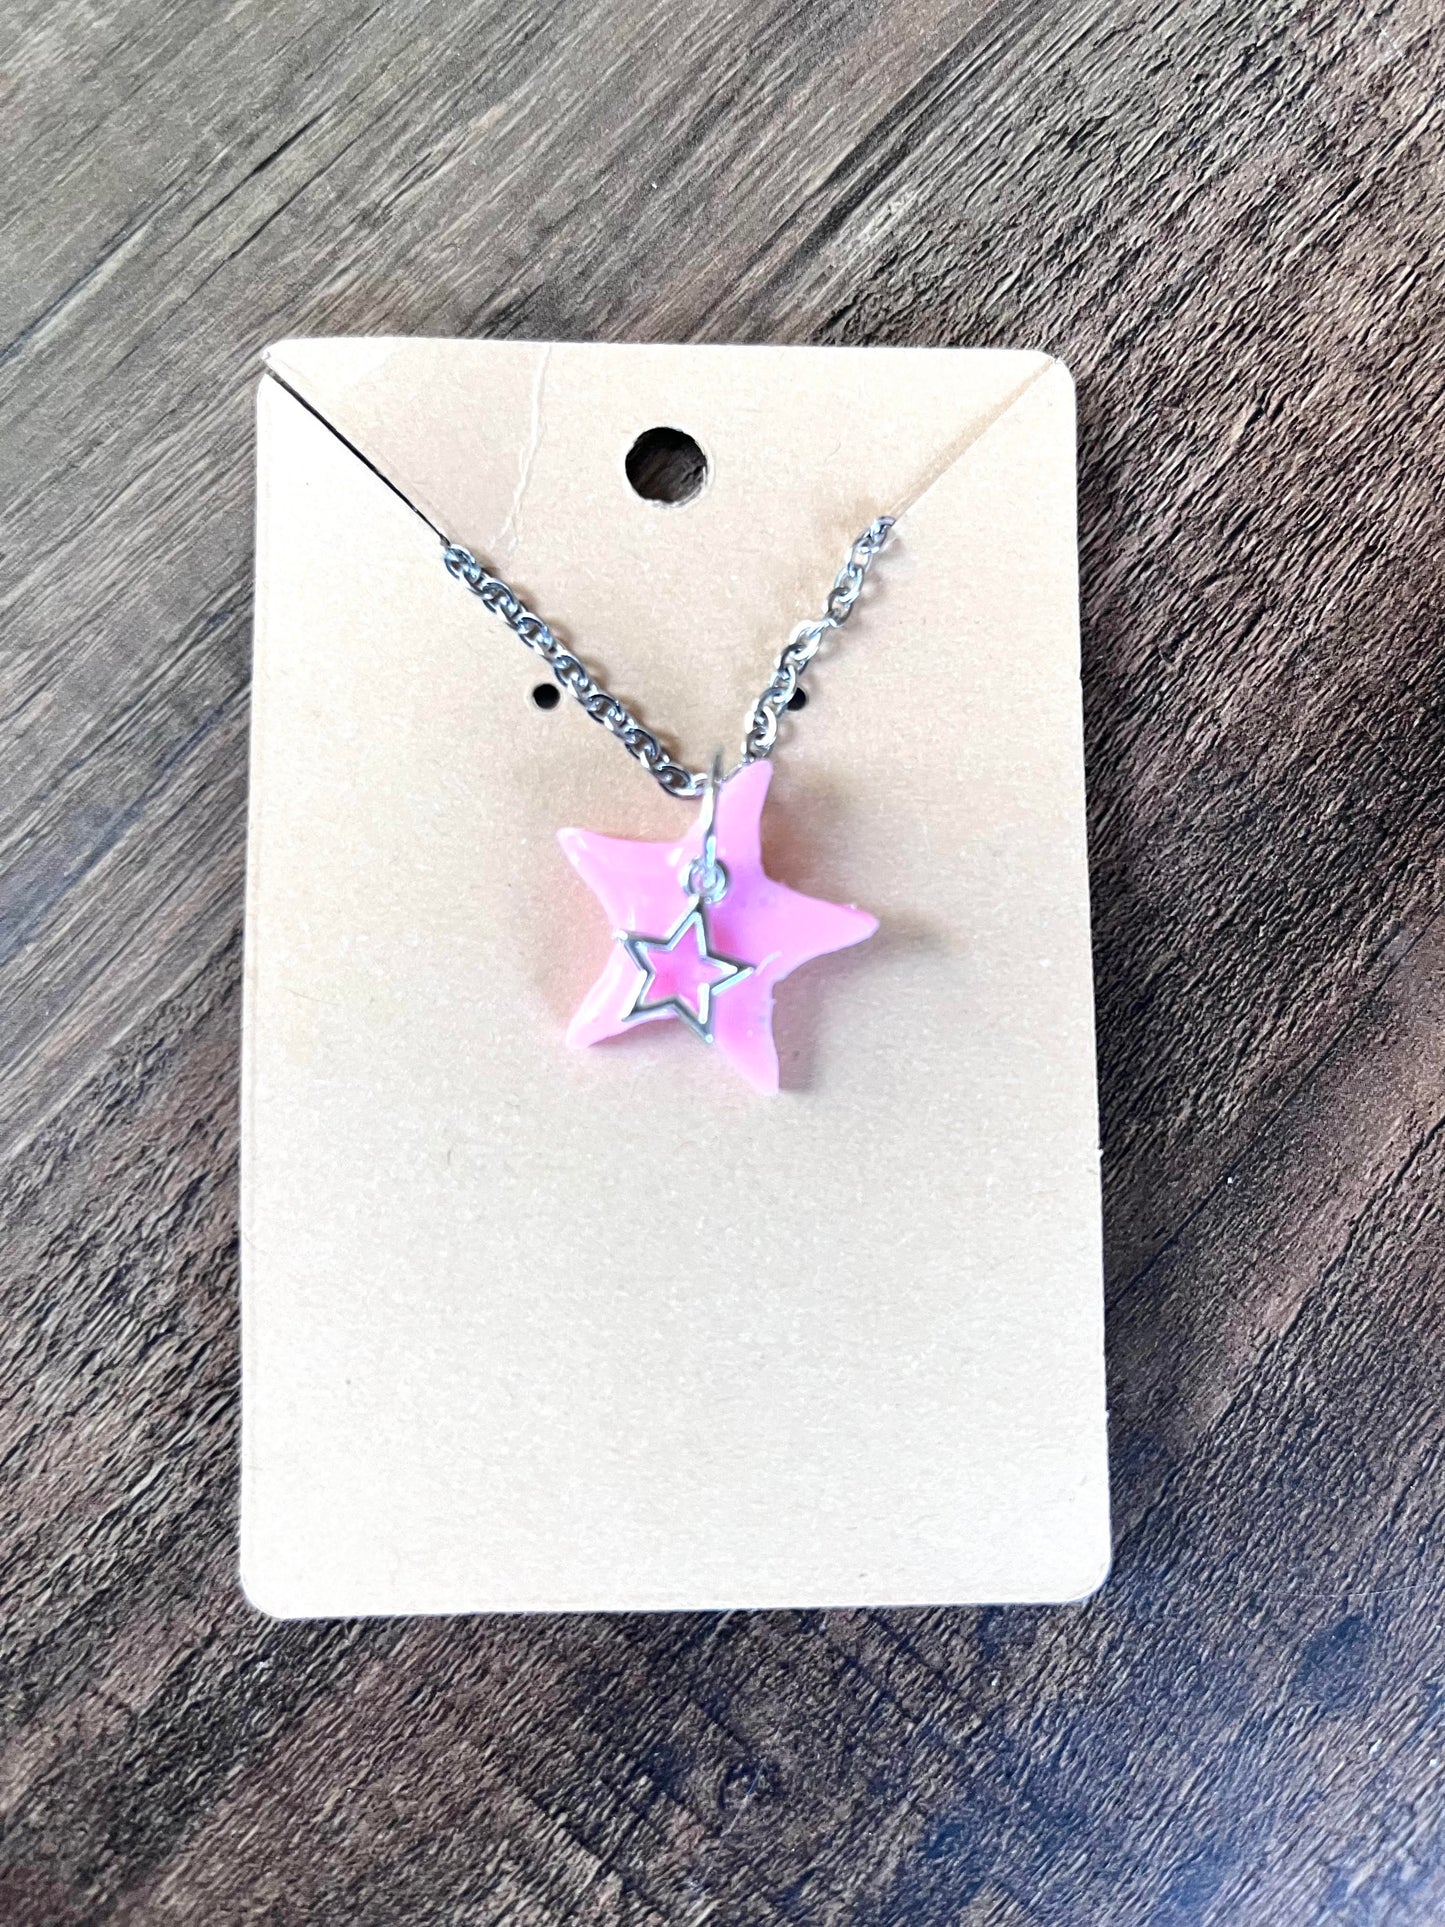 Clay Jewelry in "Pink Star" Collection